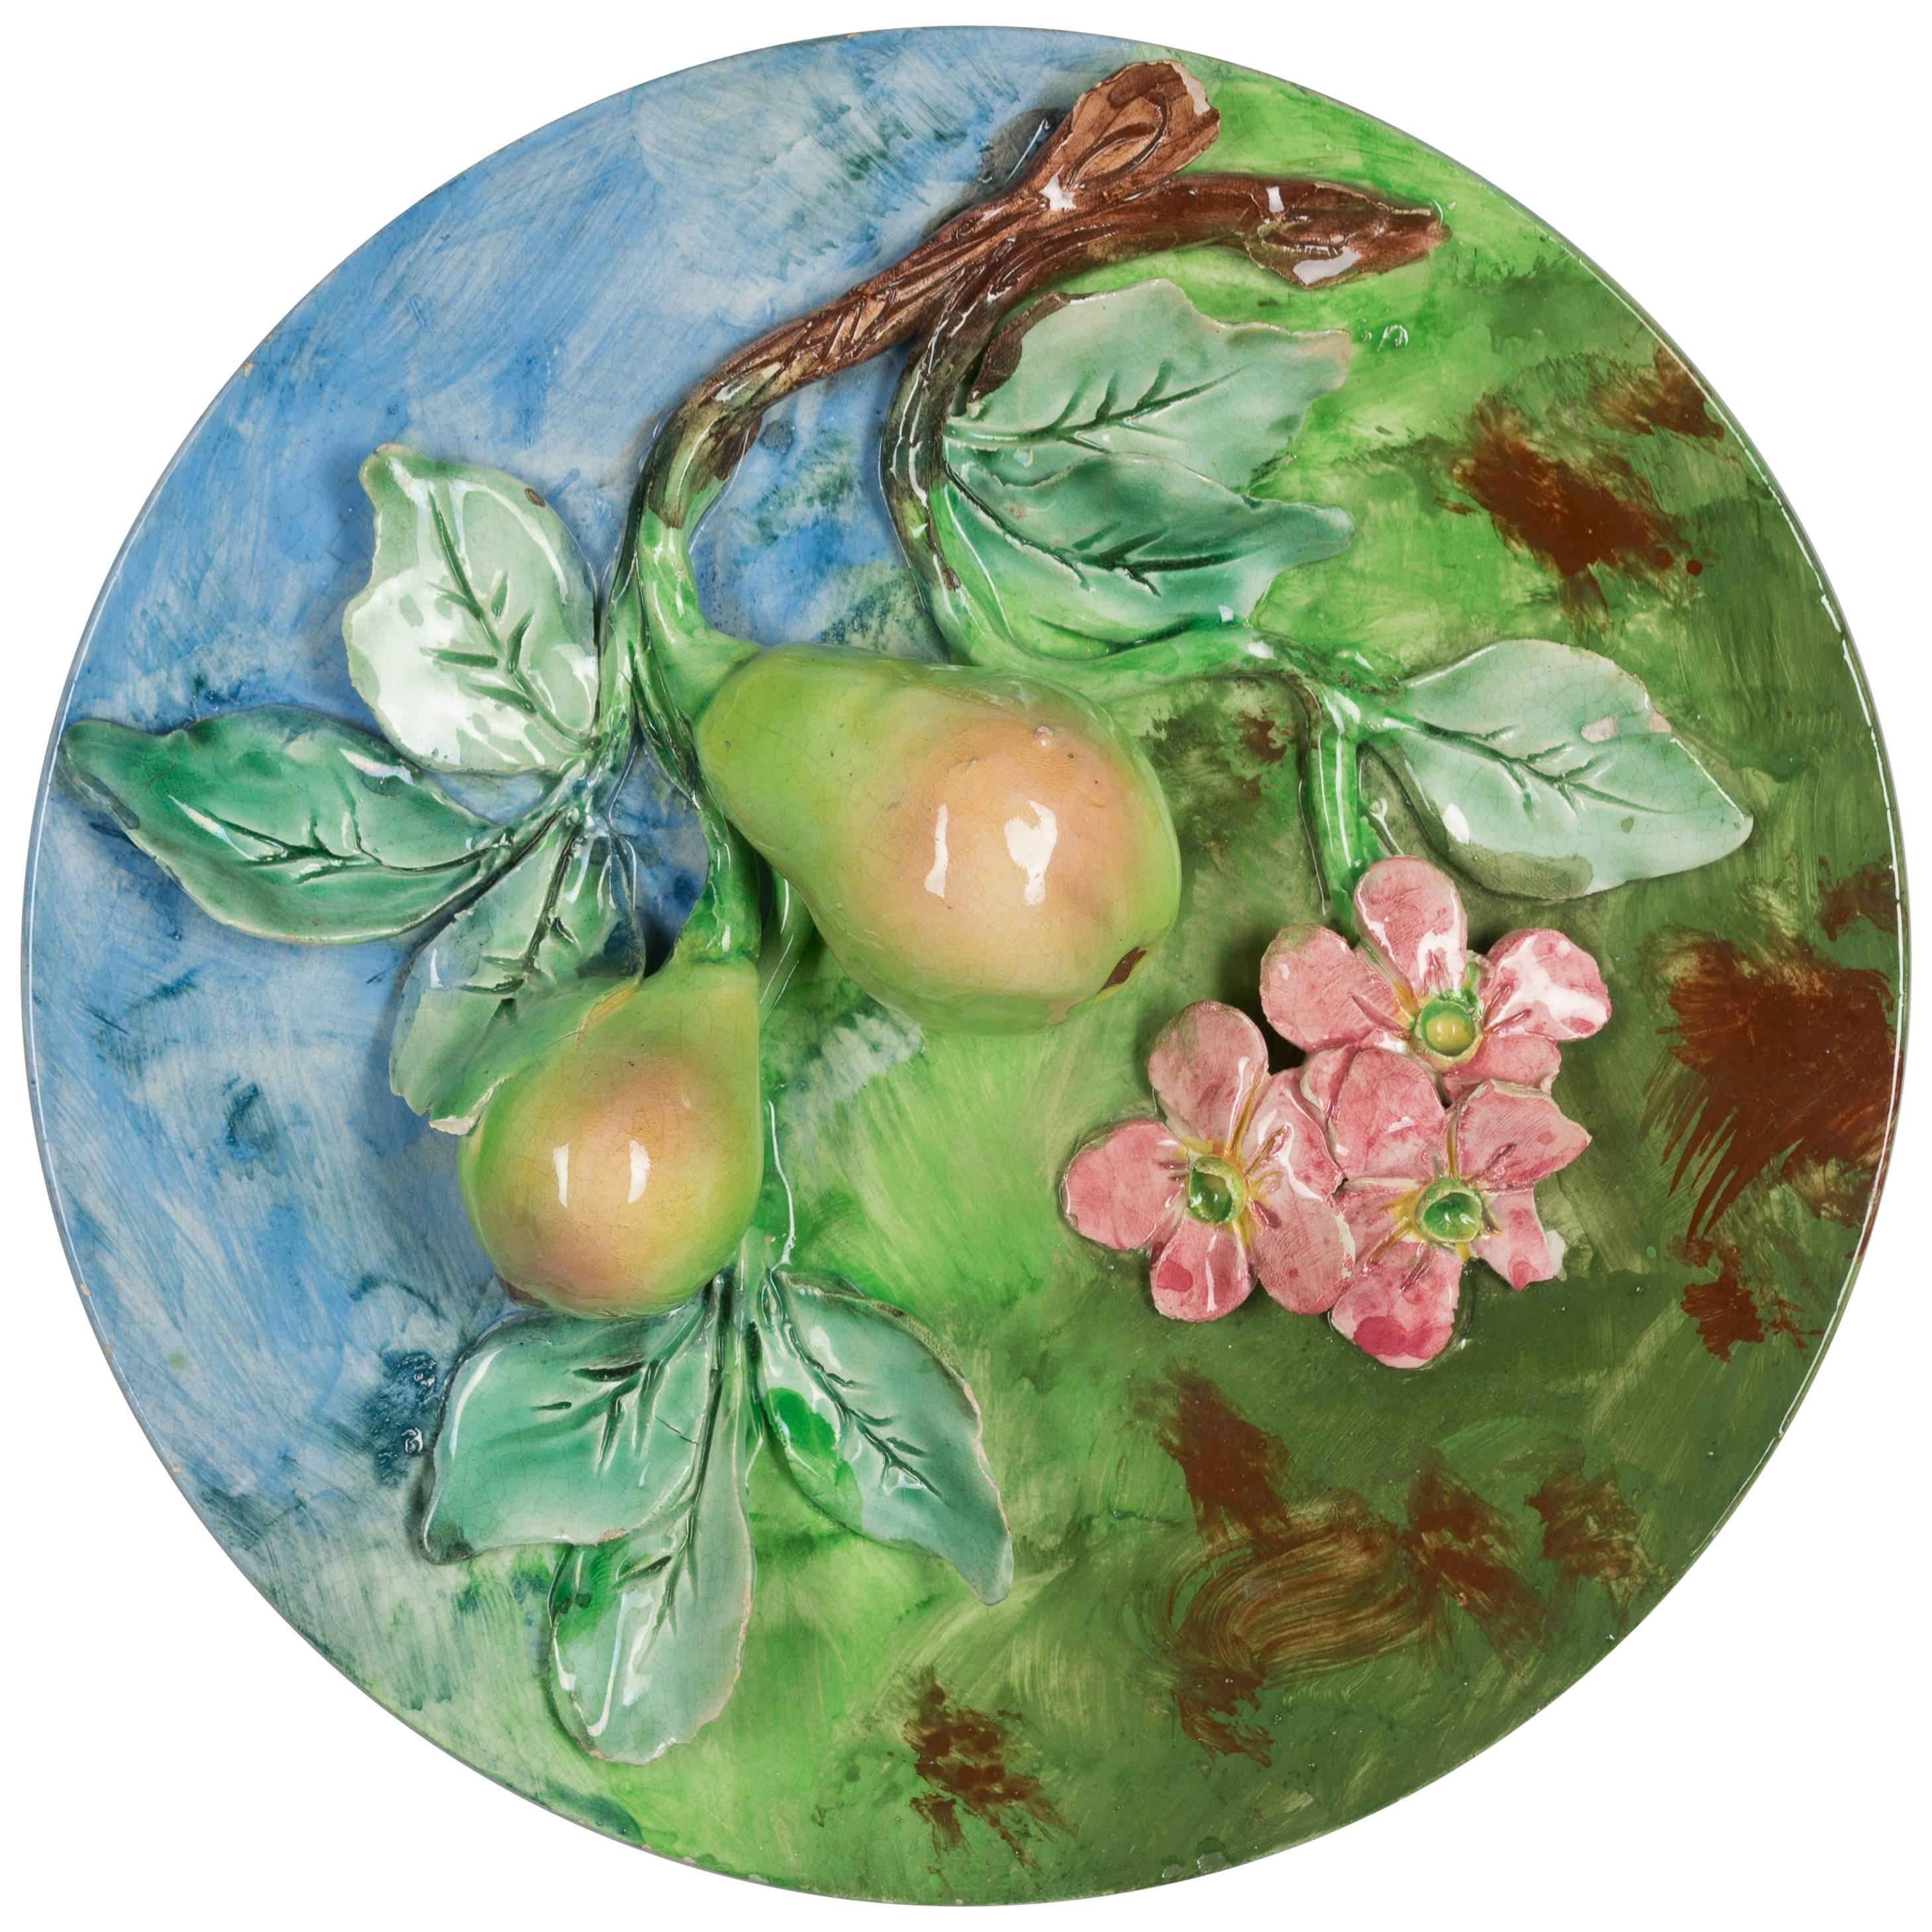 French majolica or Barbotine Wall Platter with Pears